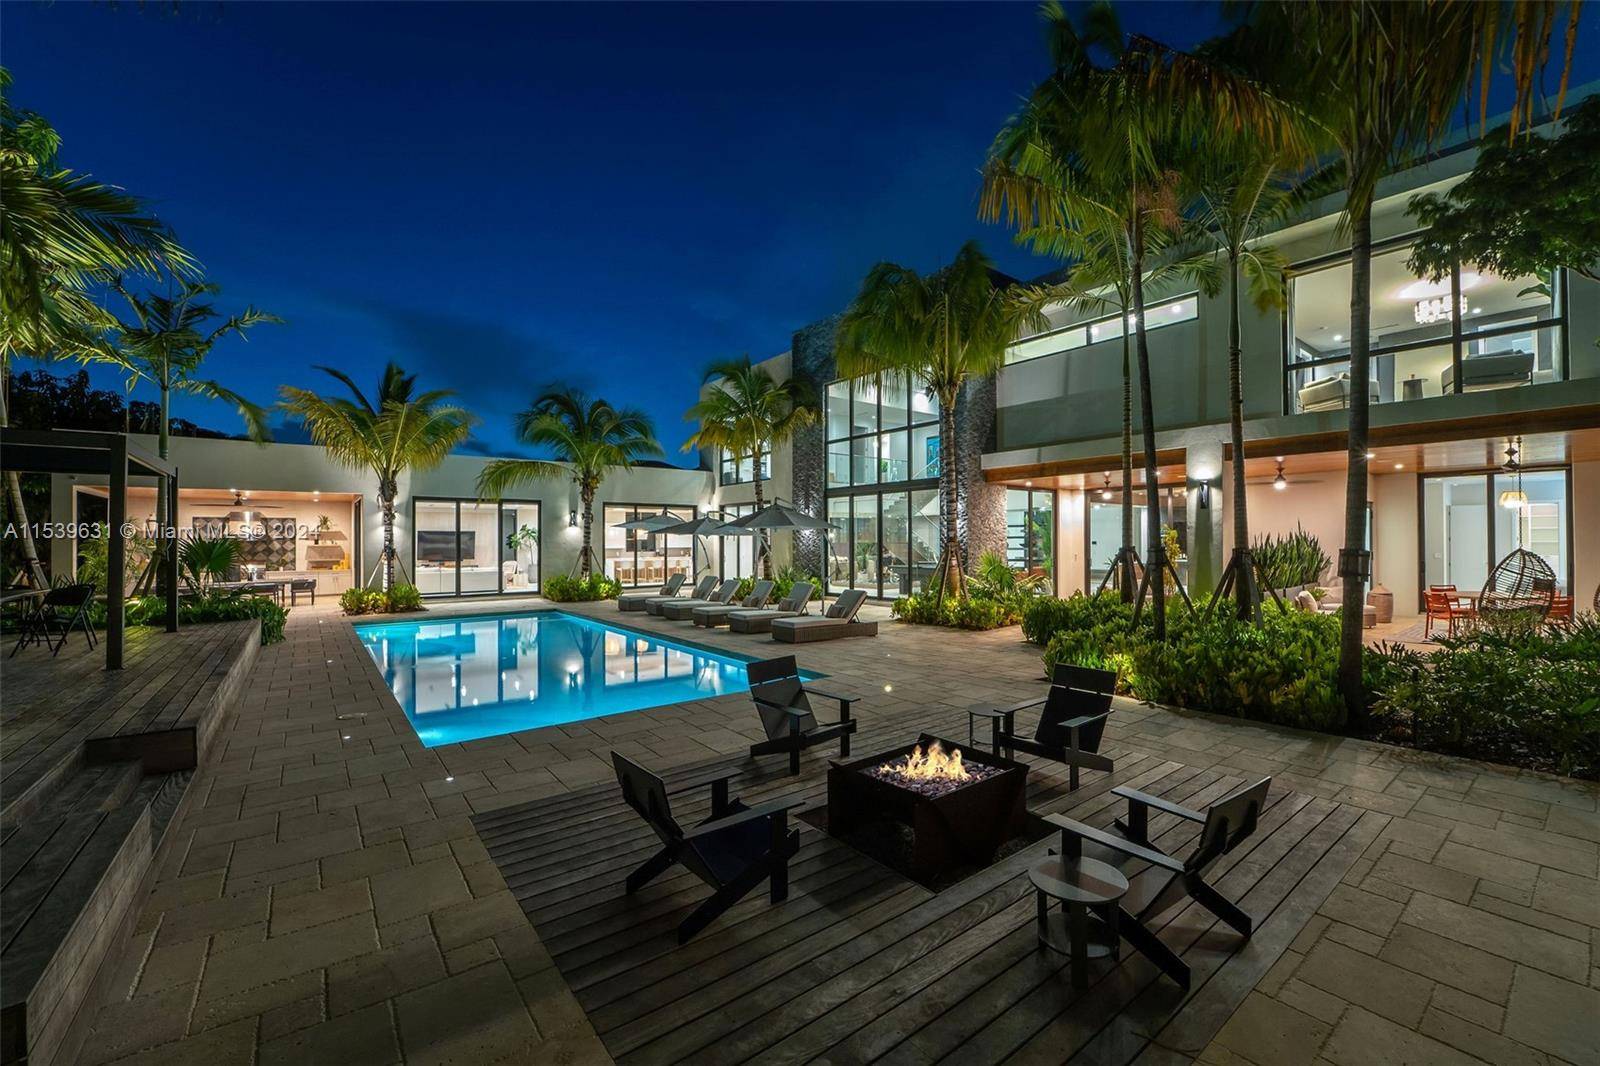 Tropical Modern Villa A masterpiece set on one of the most prestigious roads in Pinecrest.